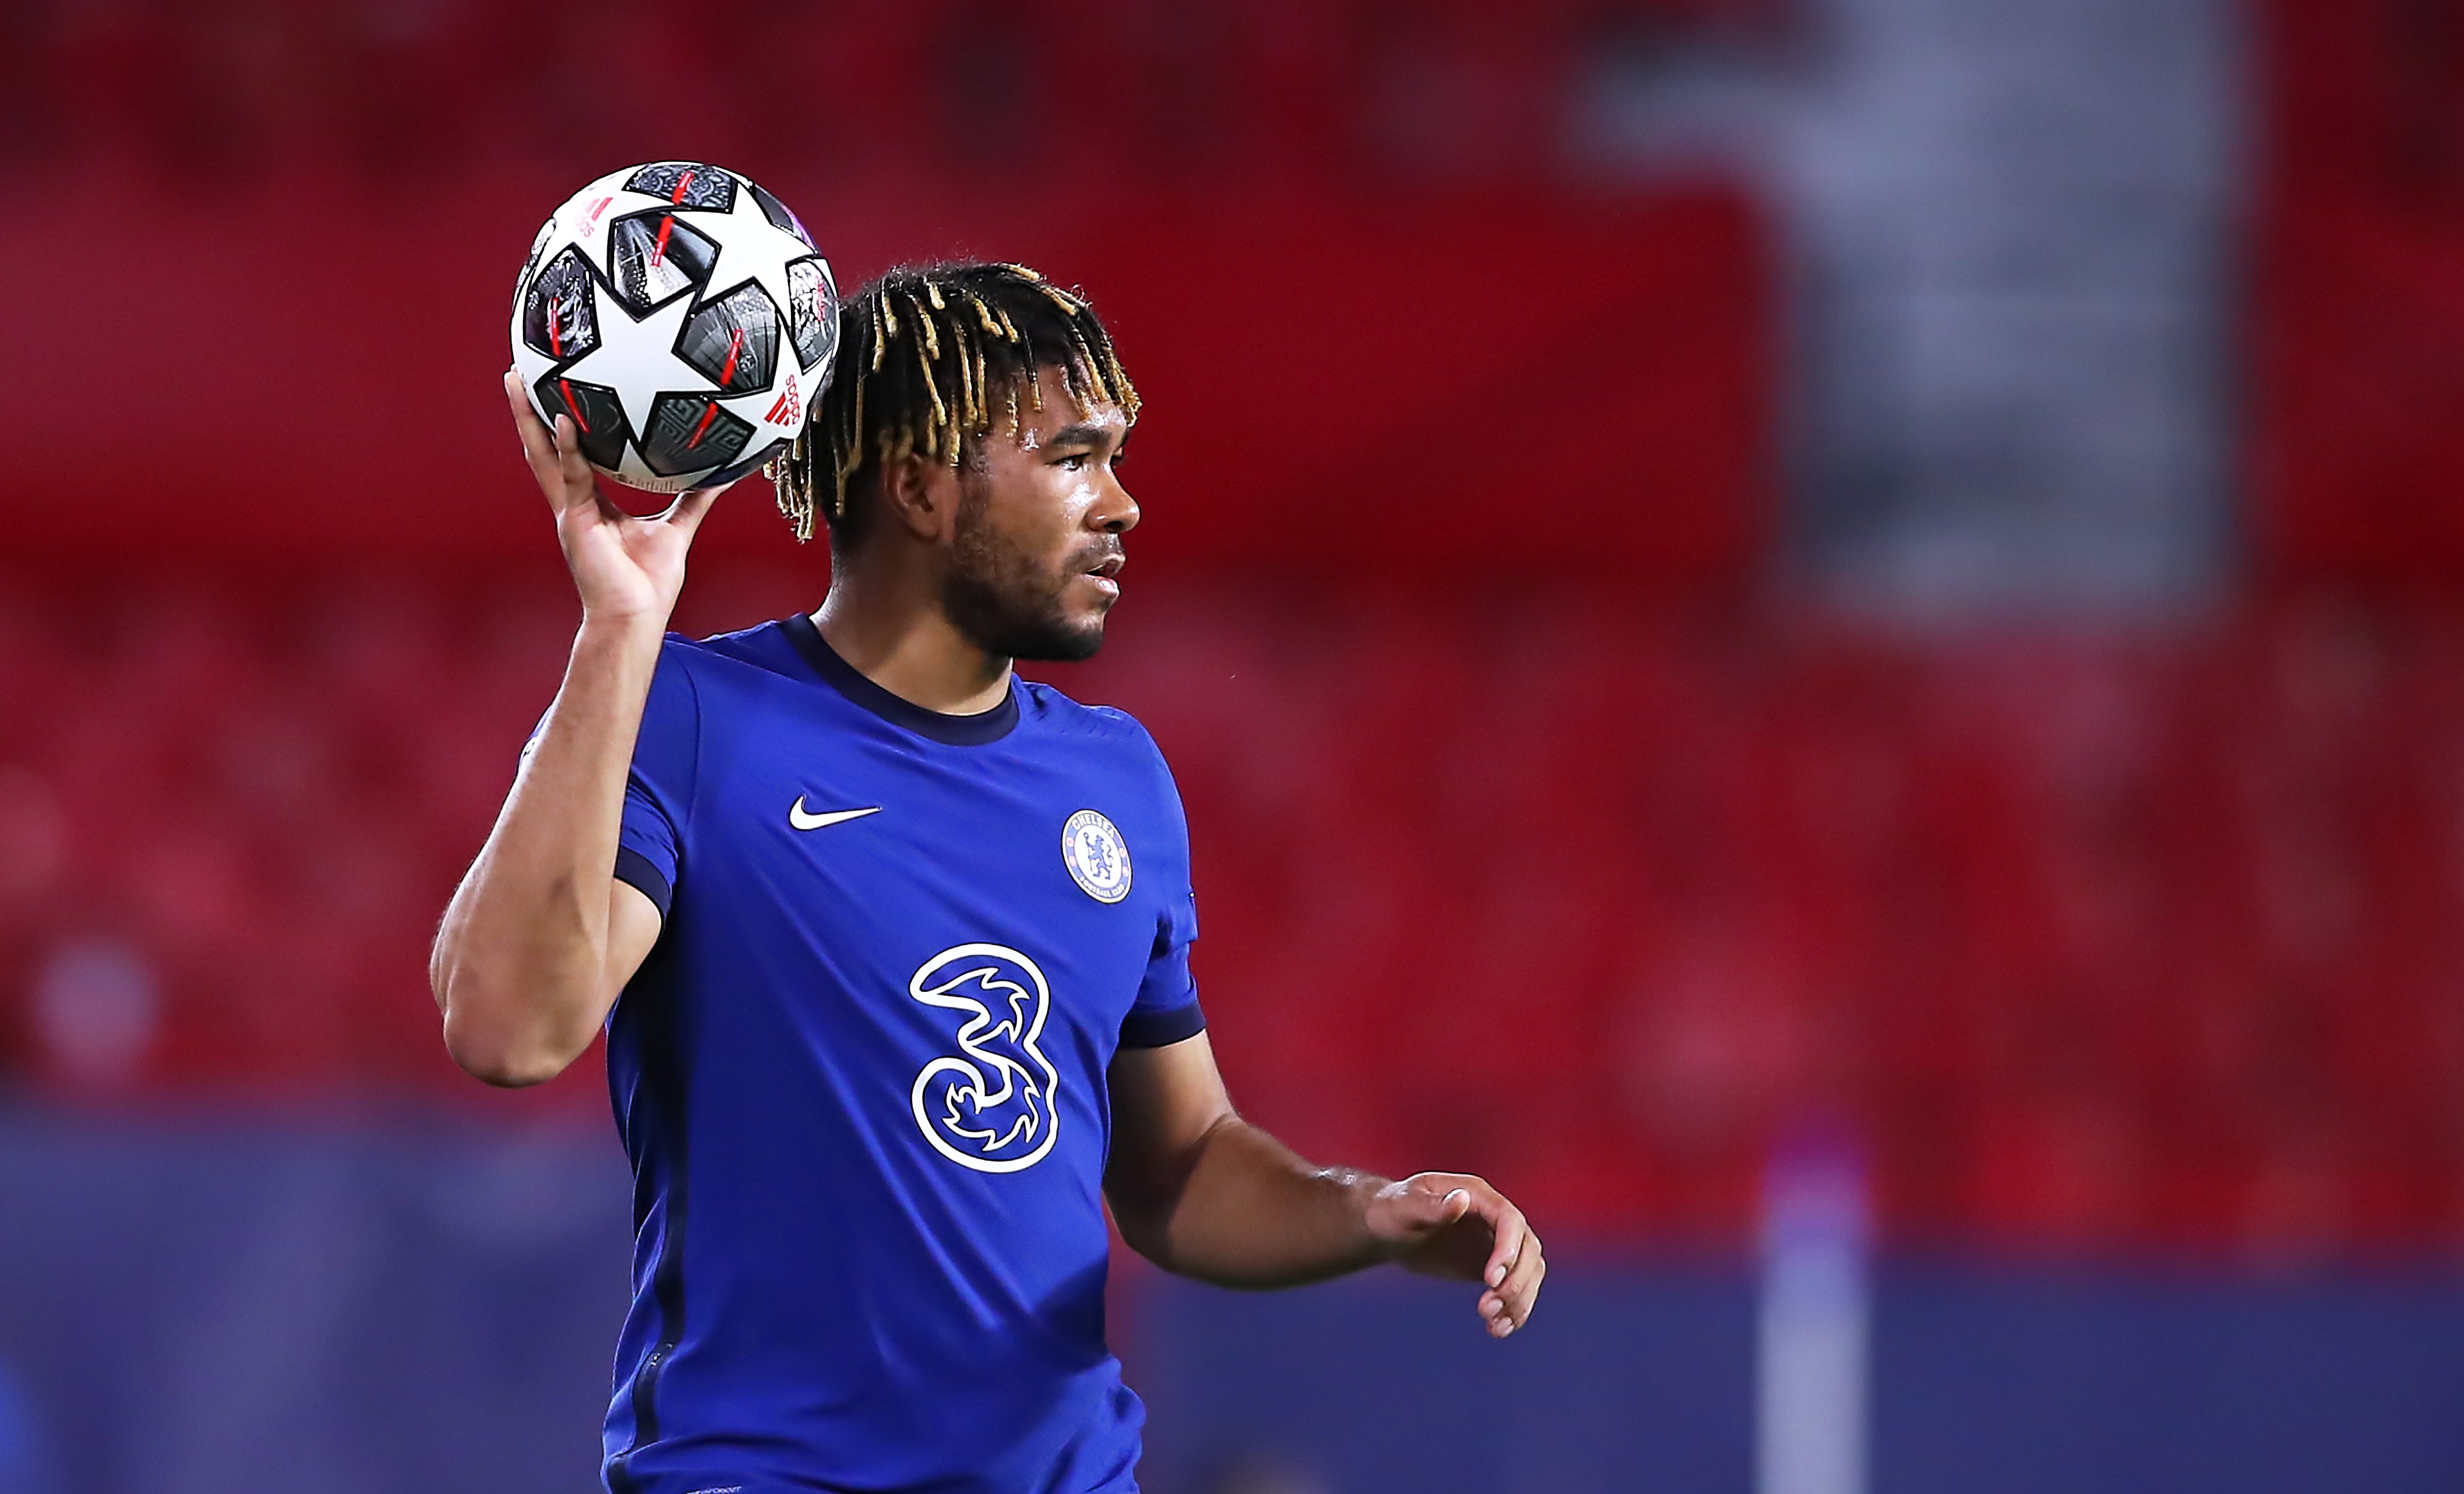 Reece James has started Chelsea’s last three Champions League matches